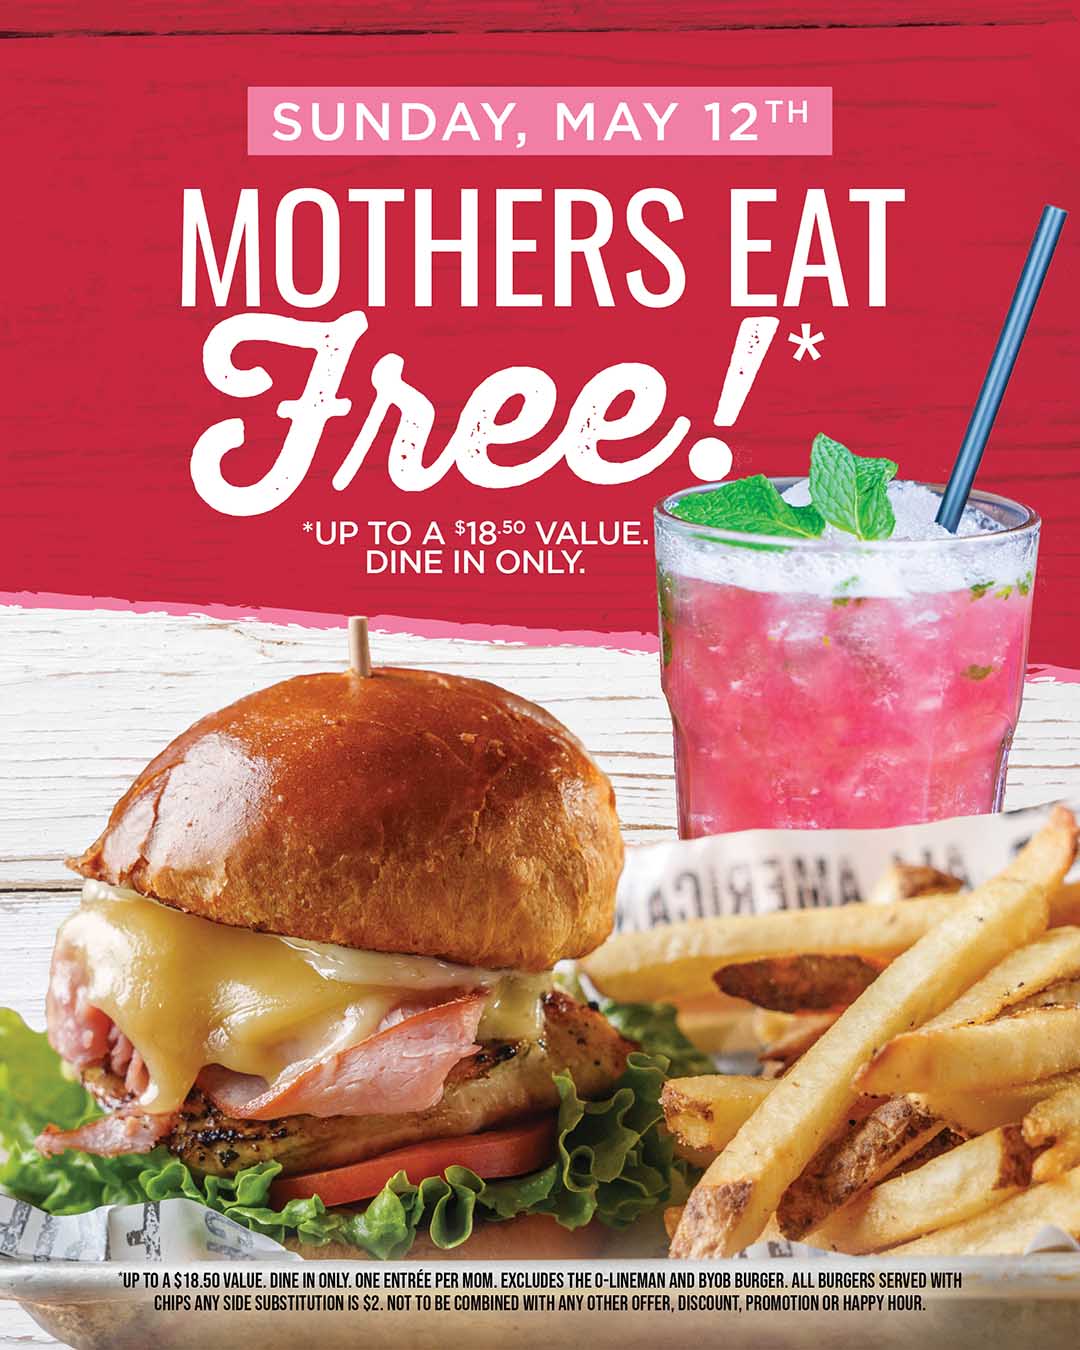 Mothers Eat Free on Mother's Day